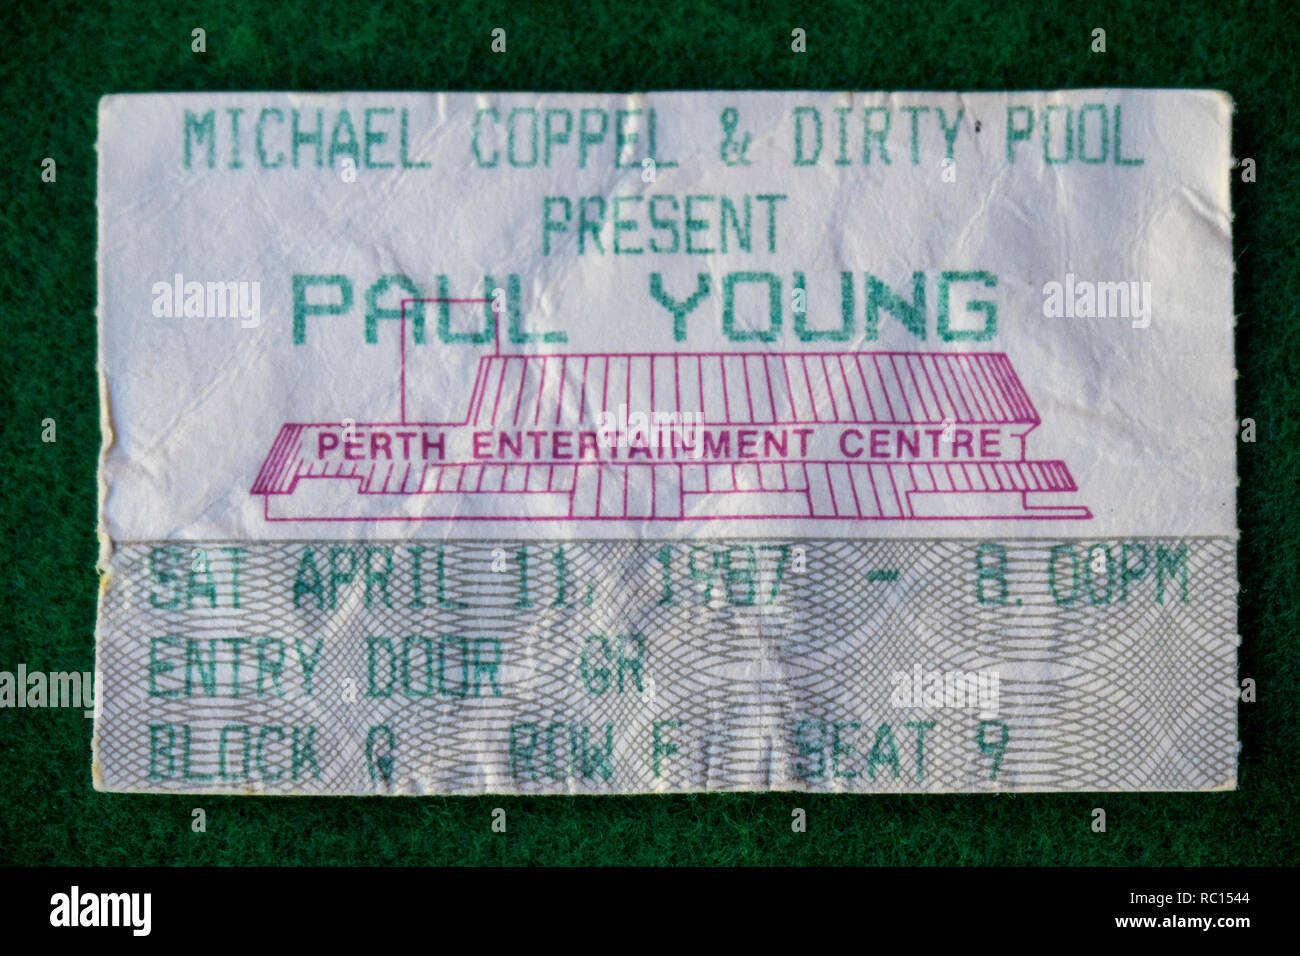 Ticket for Paul Young concert at Perth Entertainment Centre in 1987 WA Australia. Stock Photo